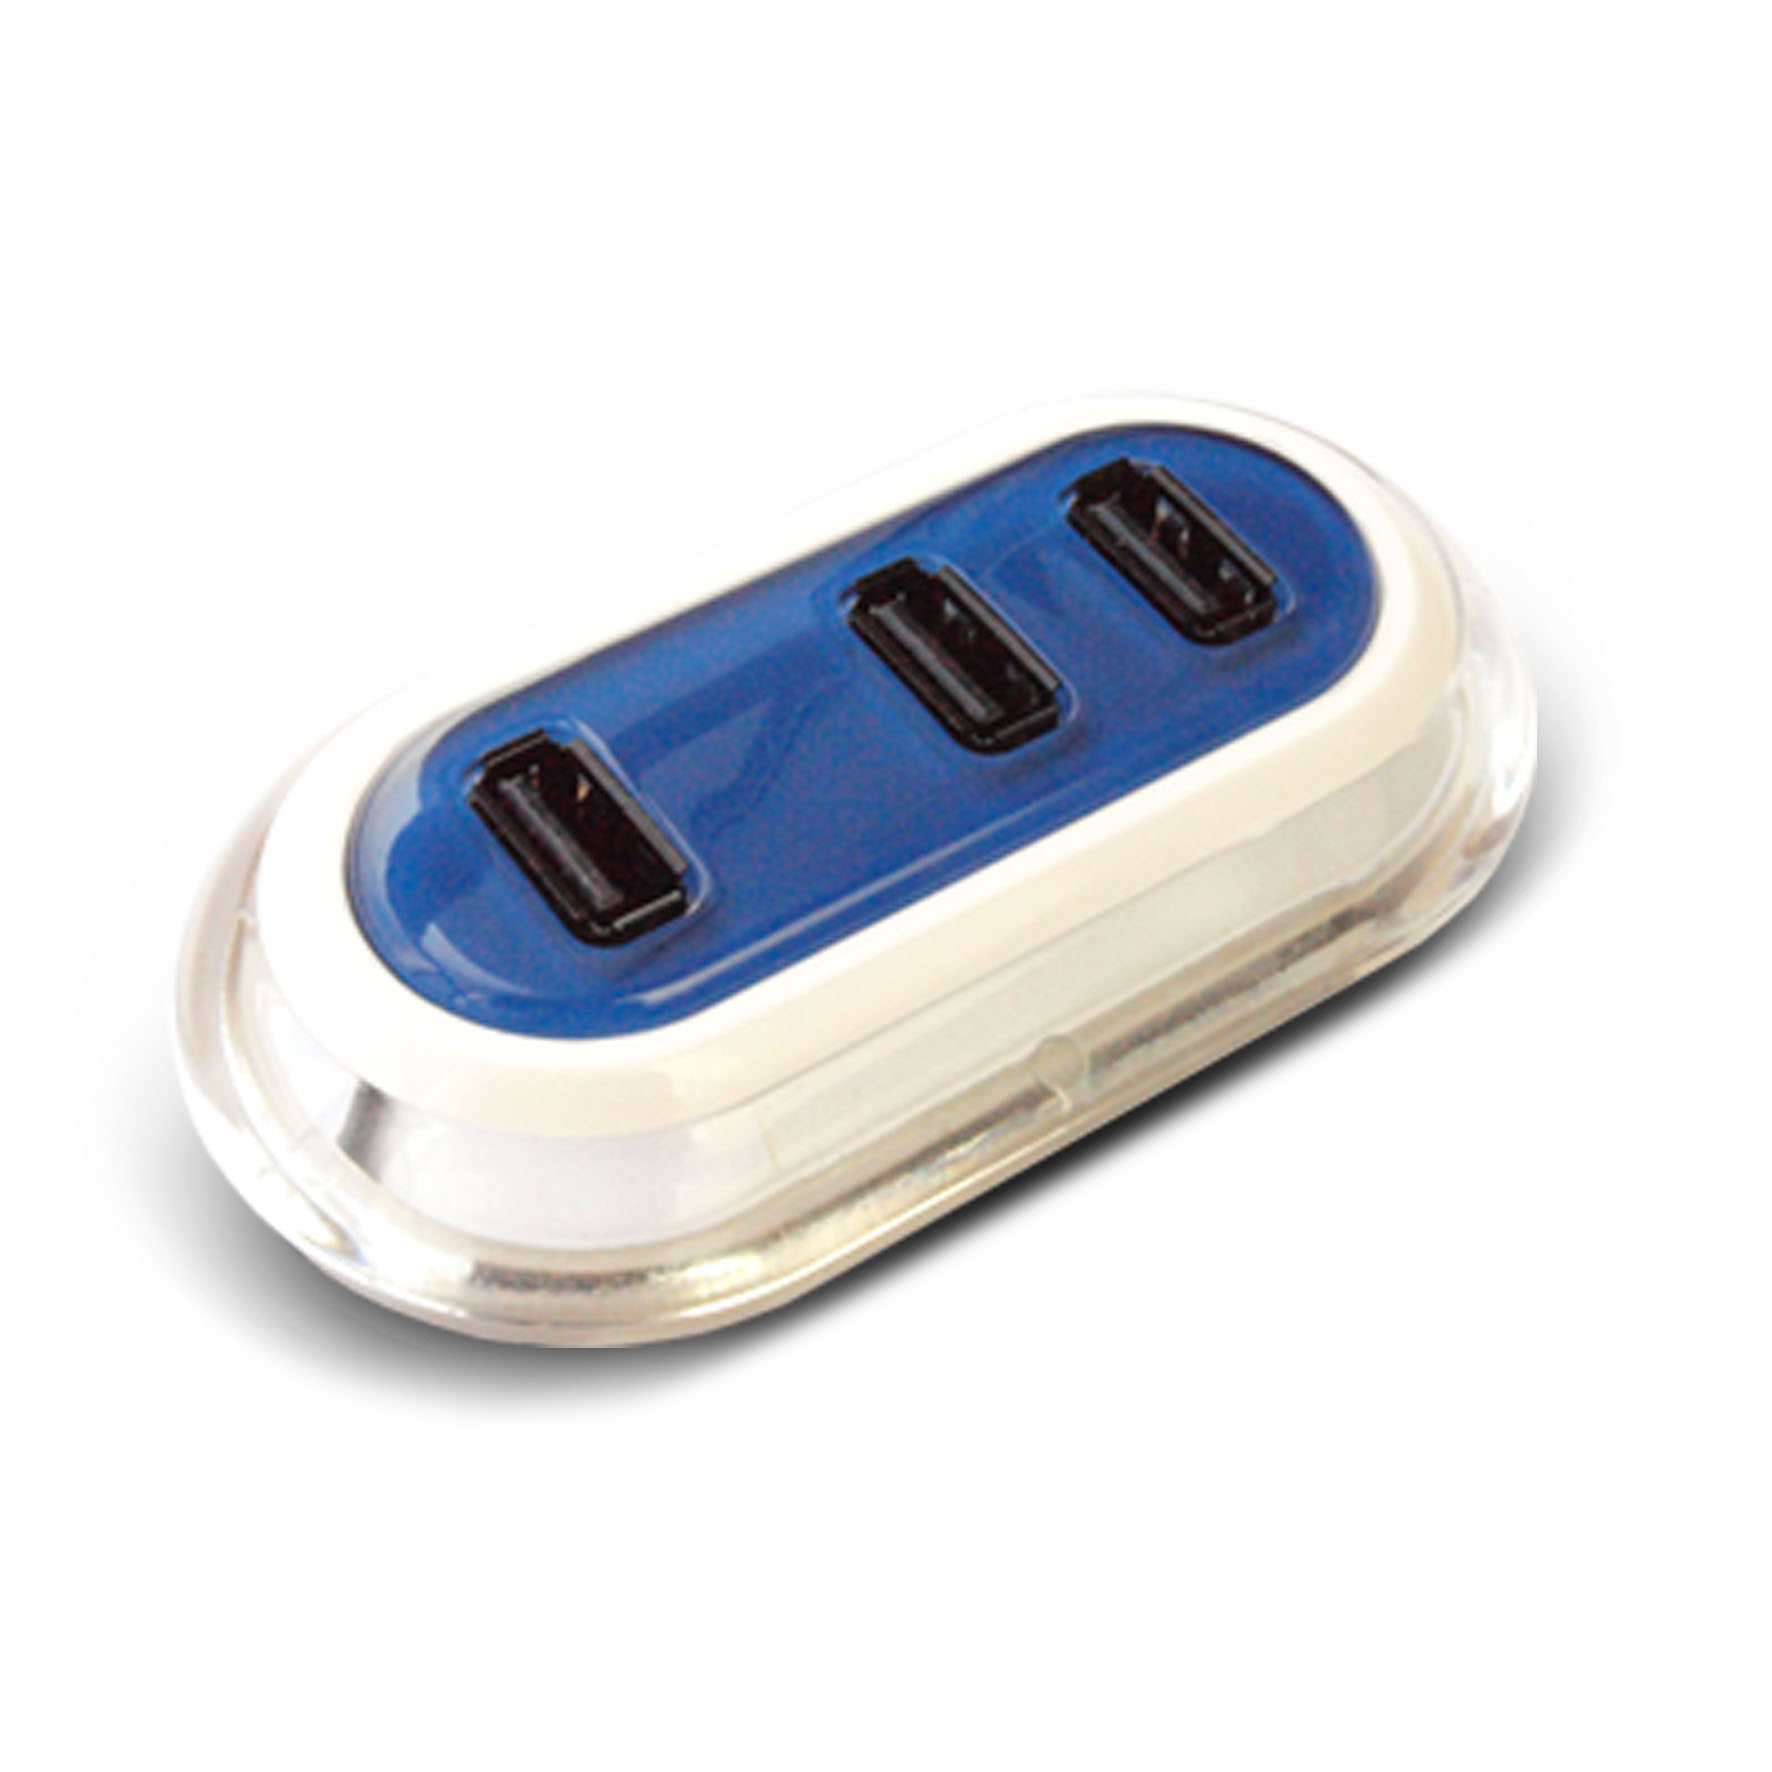 CR-826 USB Hubs with Mobile Phone Charger - Click Image to Close